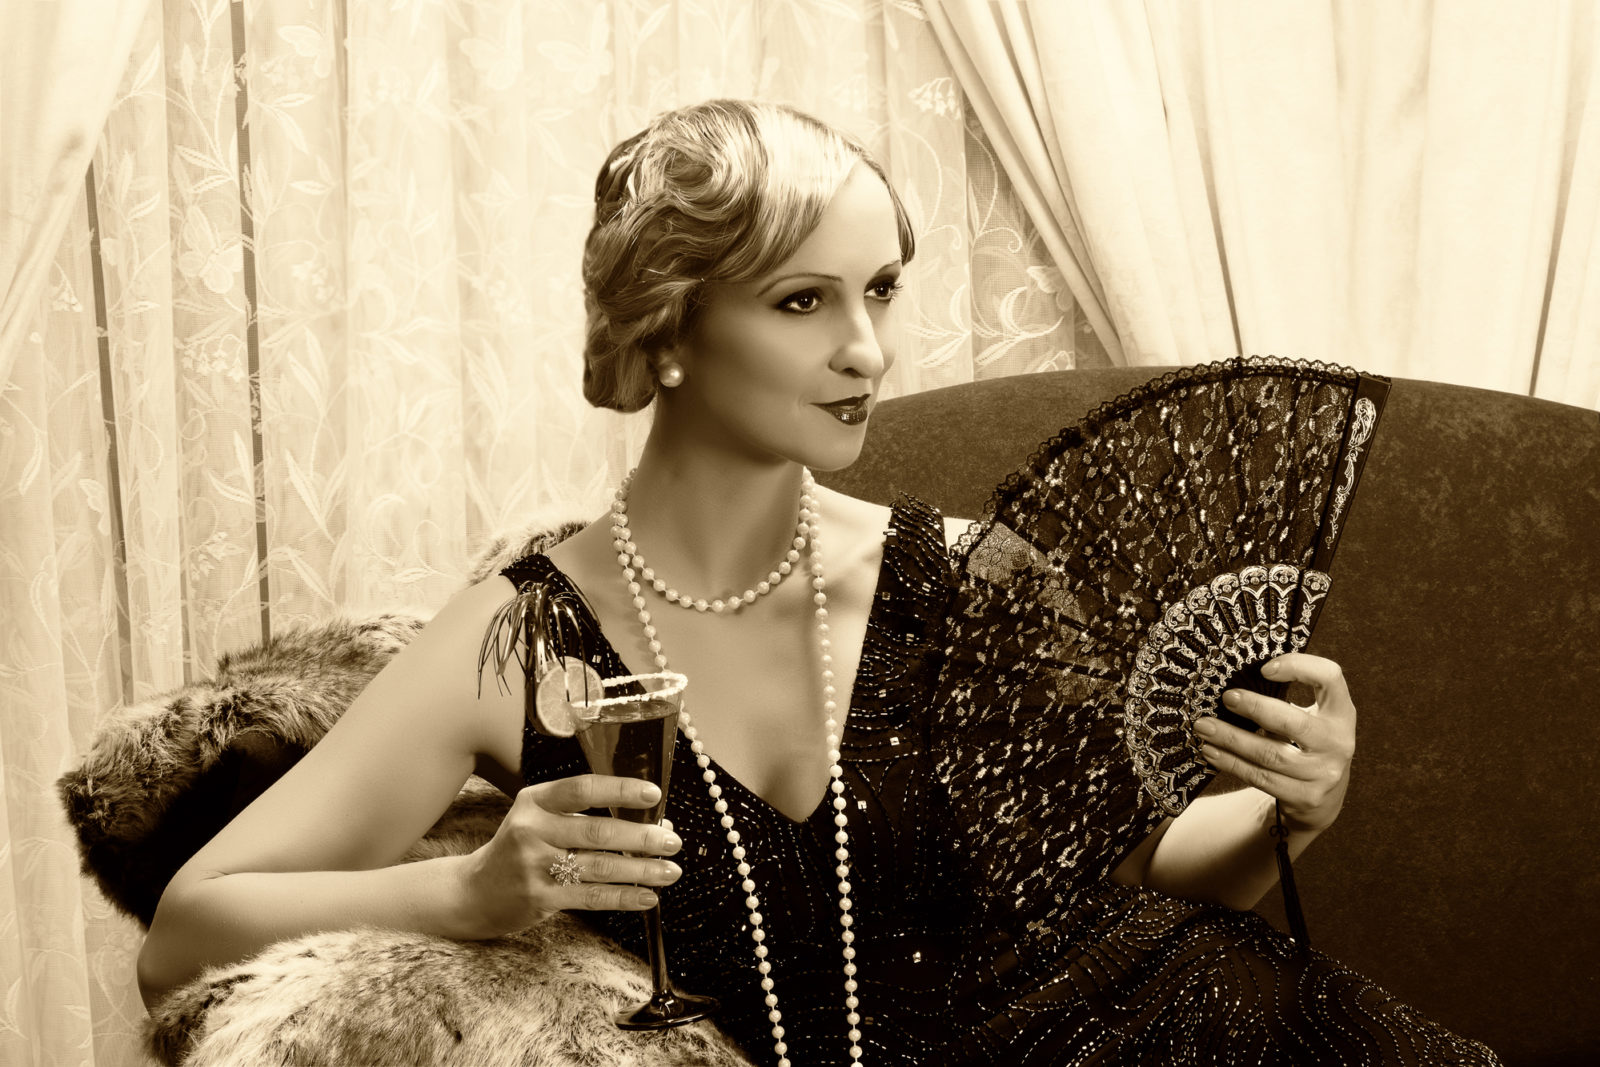 The Great Gatsby theme for events